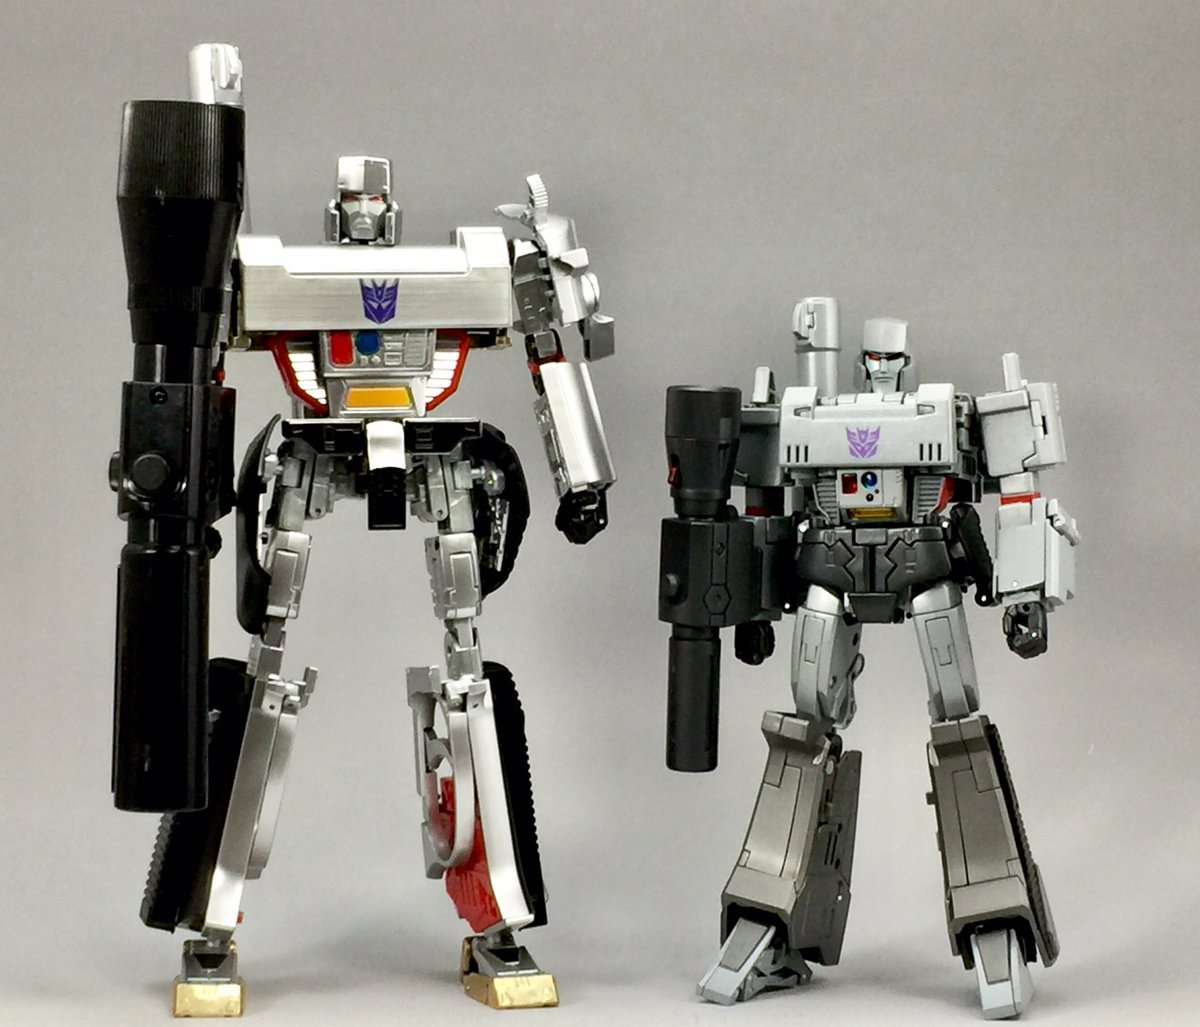 Image-Heavy Round-up of In-hand Takara Tomy Transformers